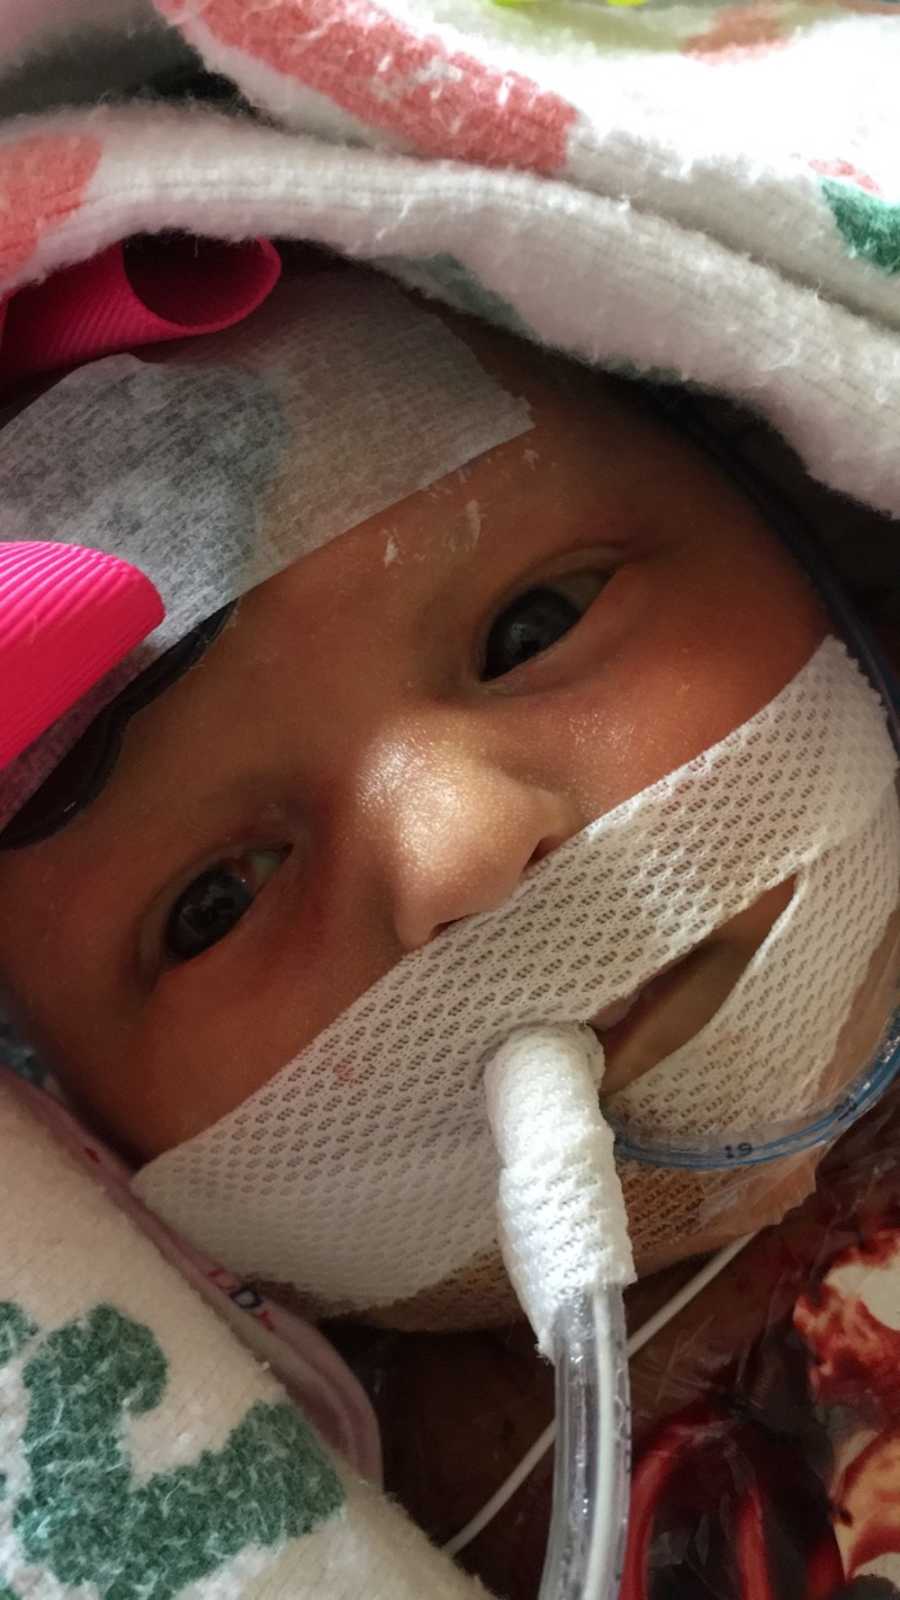 Newborn with pentalogy of cantrell is wrapped in blanket with tube taped to her mouth